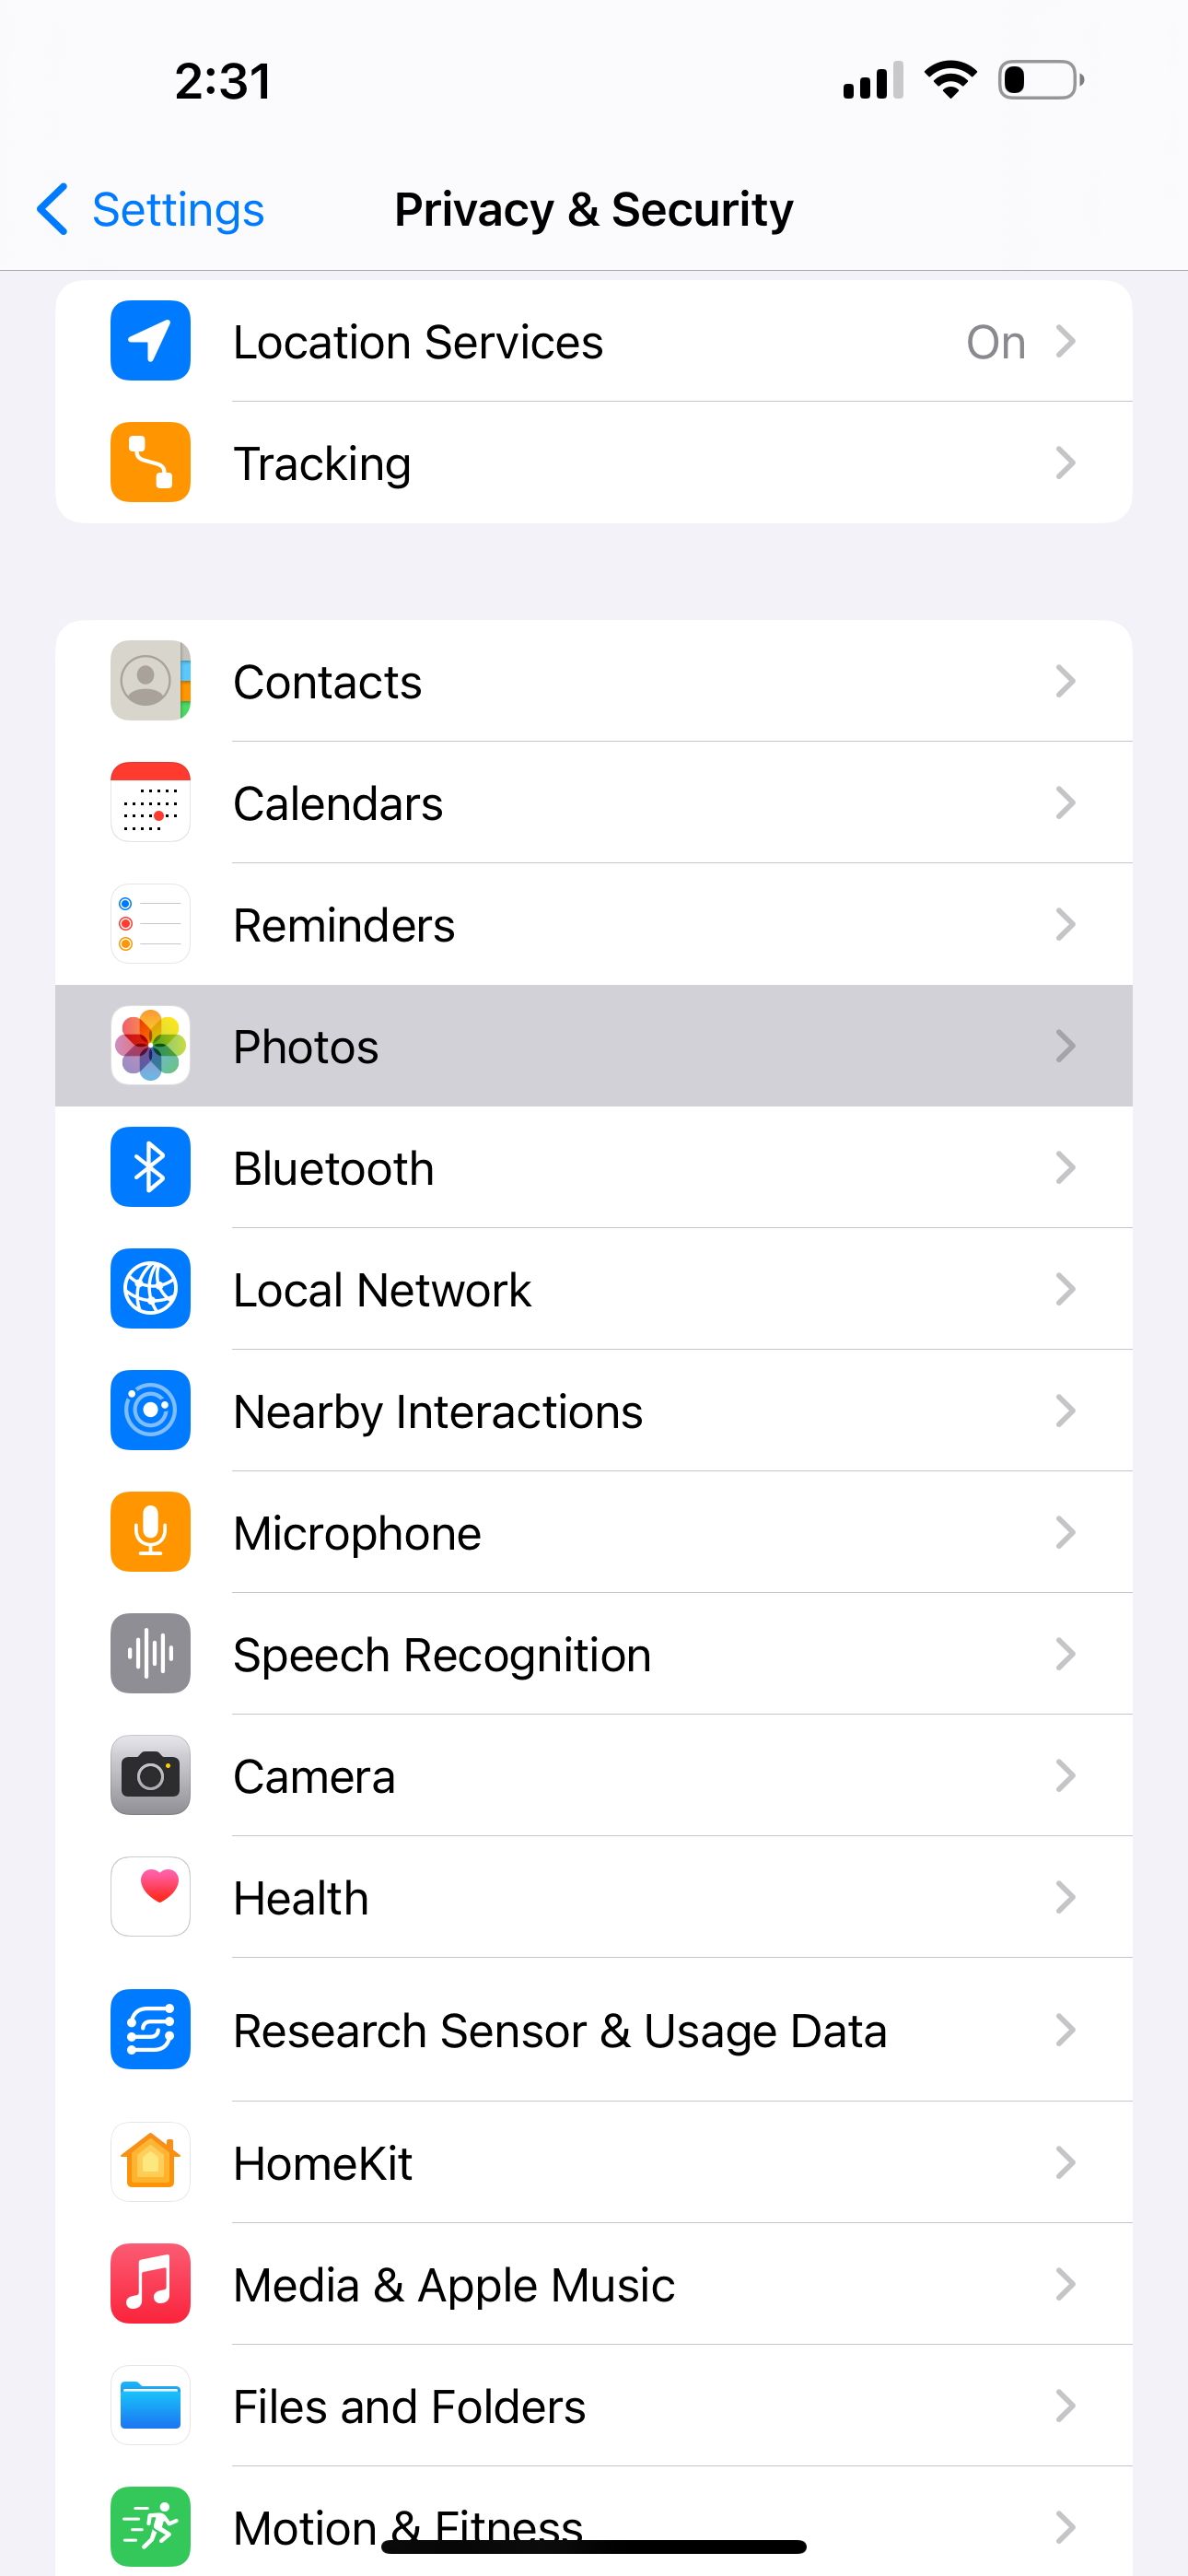 Privacy and Security settings in iOS